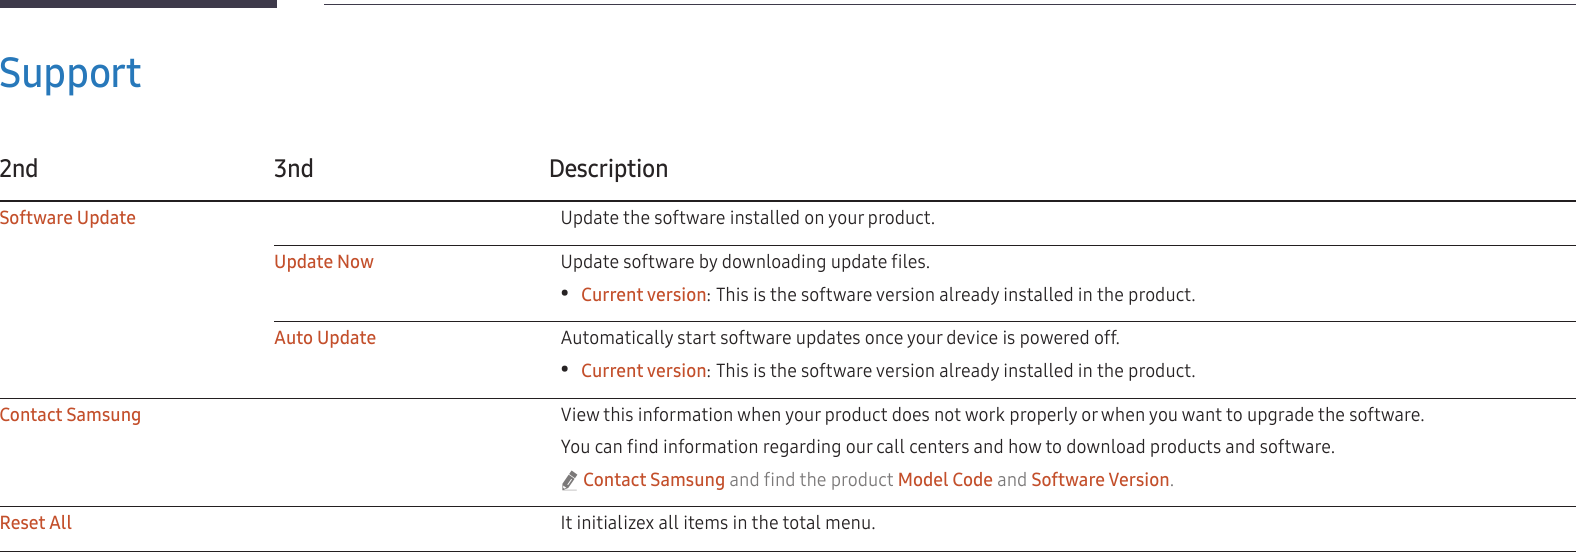 39Support2nd 3nd DescriptionSoftware Update Update the software installed on your product.Update Now Update software by downloading update files. •Current version: This is the software version already installed in the product.Auto Update Automatically start software updates once your device is powered off. •Current version: This is the software version already installed in the product. Contact Samsung View this information when your product does not work properly or when you want to upgrade the software.You can find information regarding our call centers and how to download products and software. &quot;Contact Samsung and find the product Model Code and Software Version.Reset All It initializex all items in the total menu.